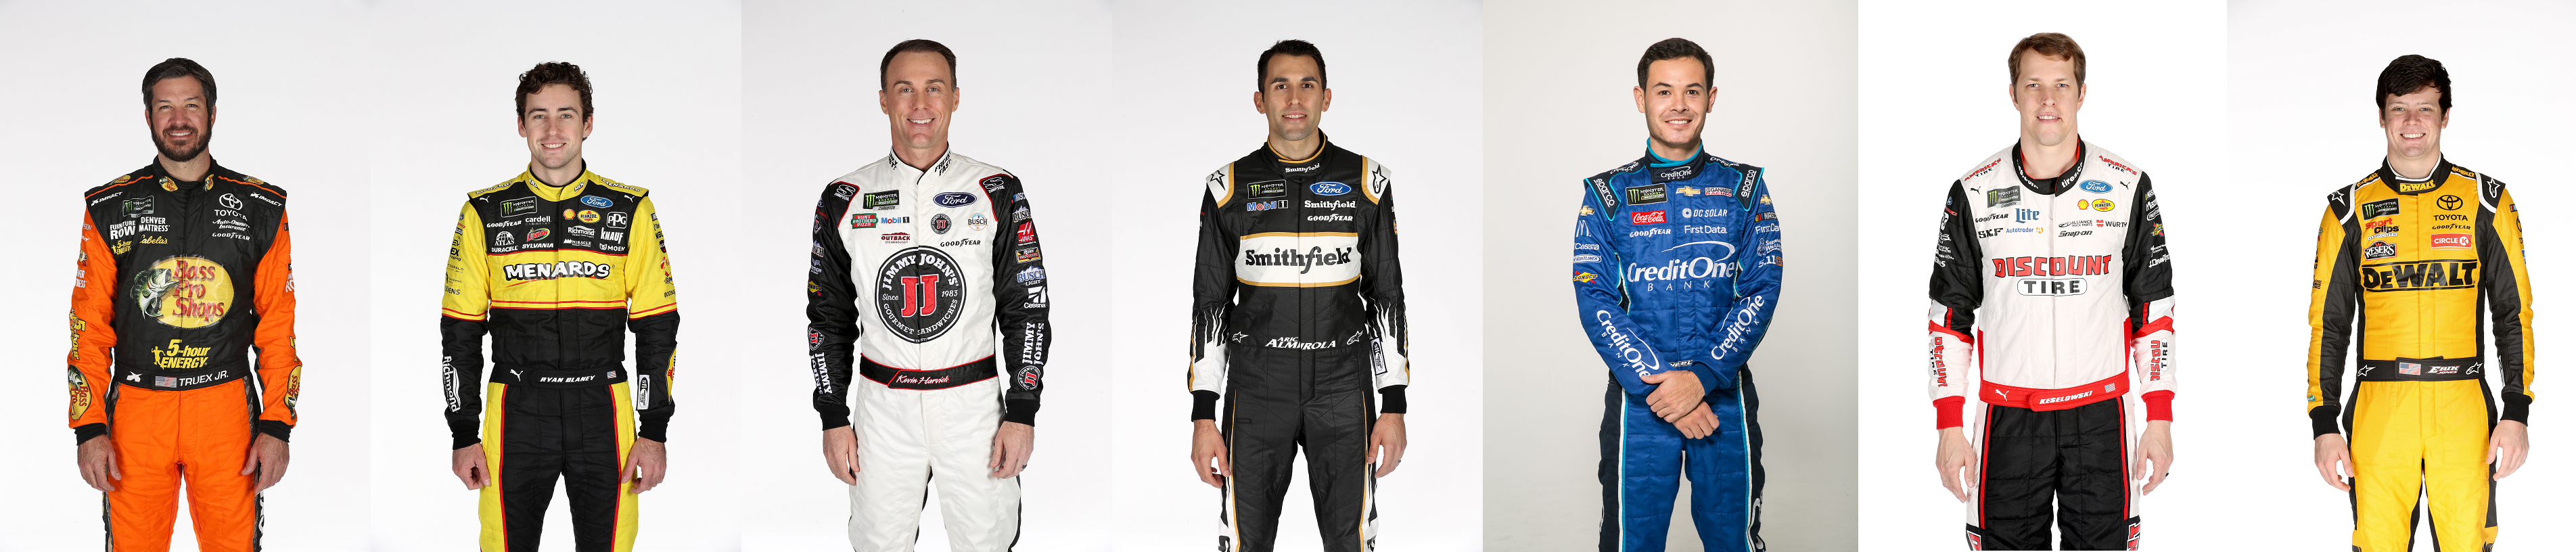 Can one of these magnificent seven win at Pocono?